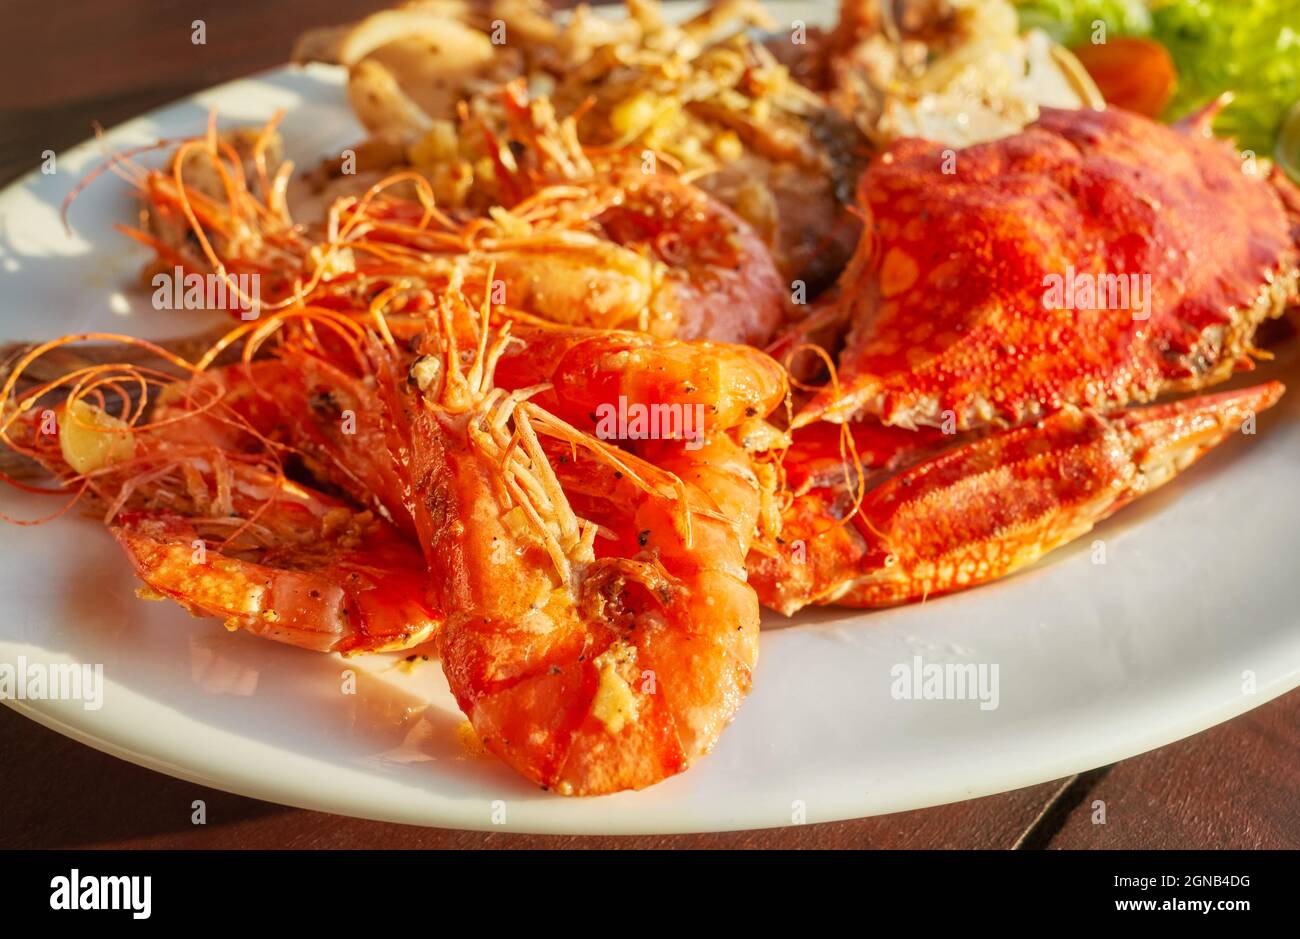 Grilled seafood platter with crab and prawns with garlic, selective focus. Stock Photo